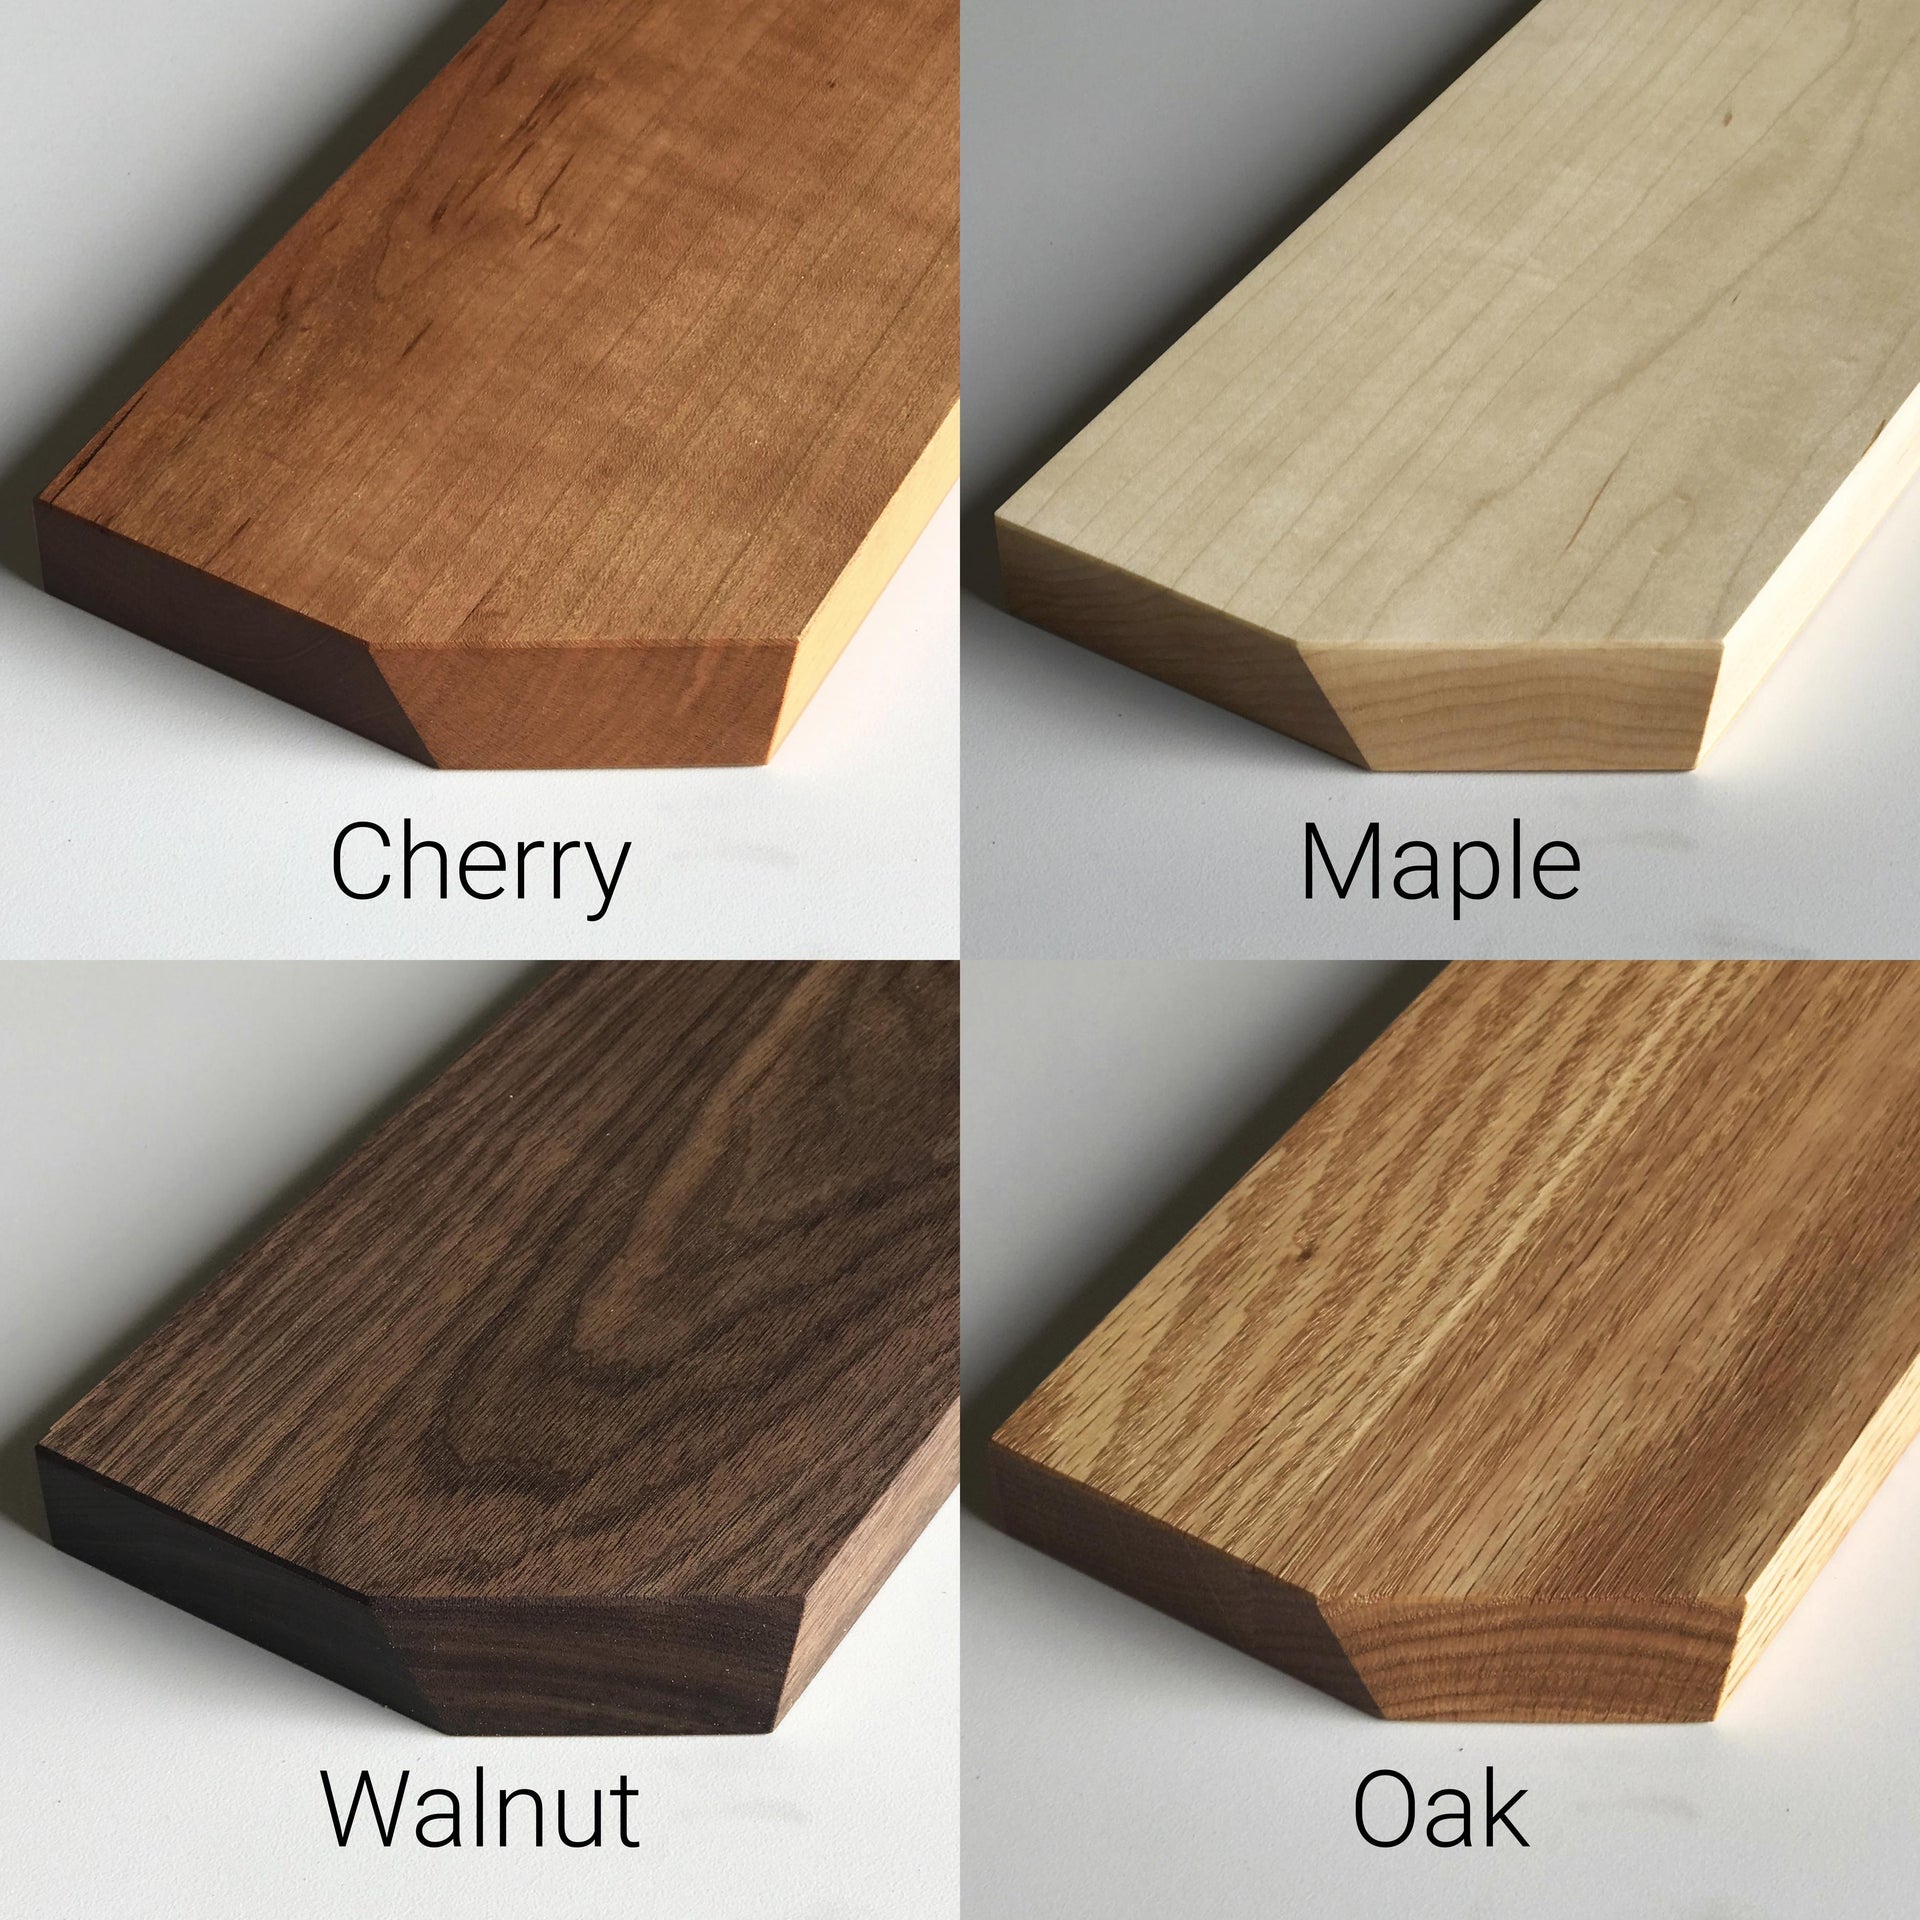 Solid wood samples of cherry, maple, walnut, and oak